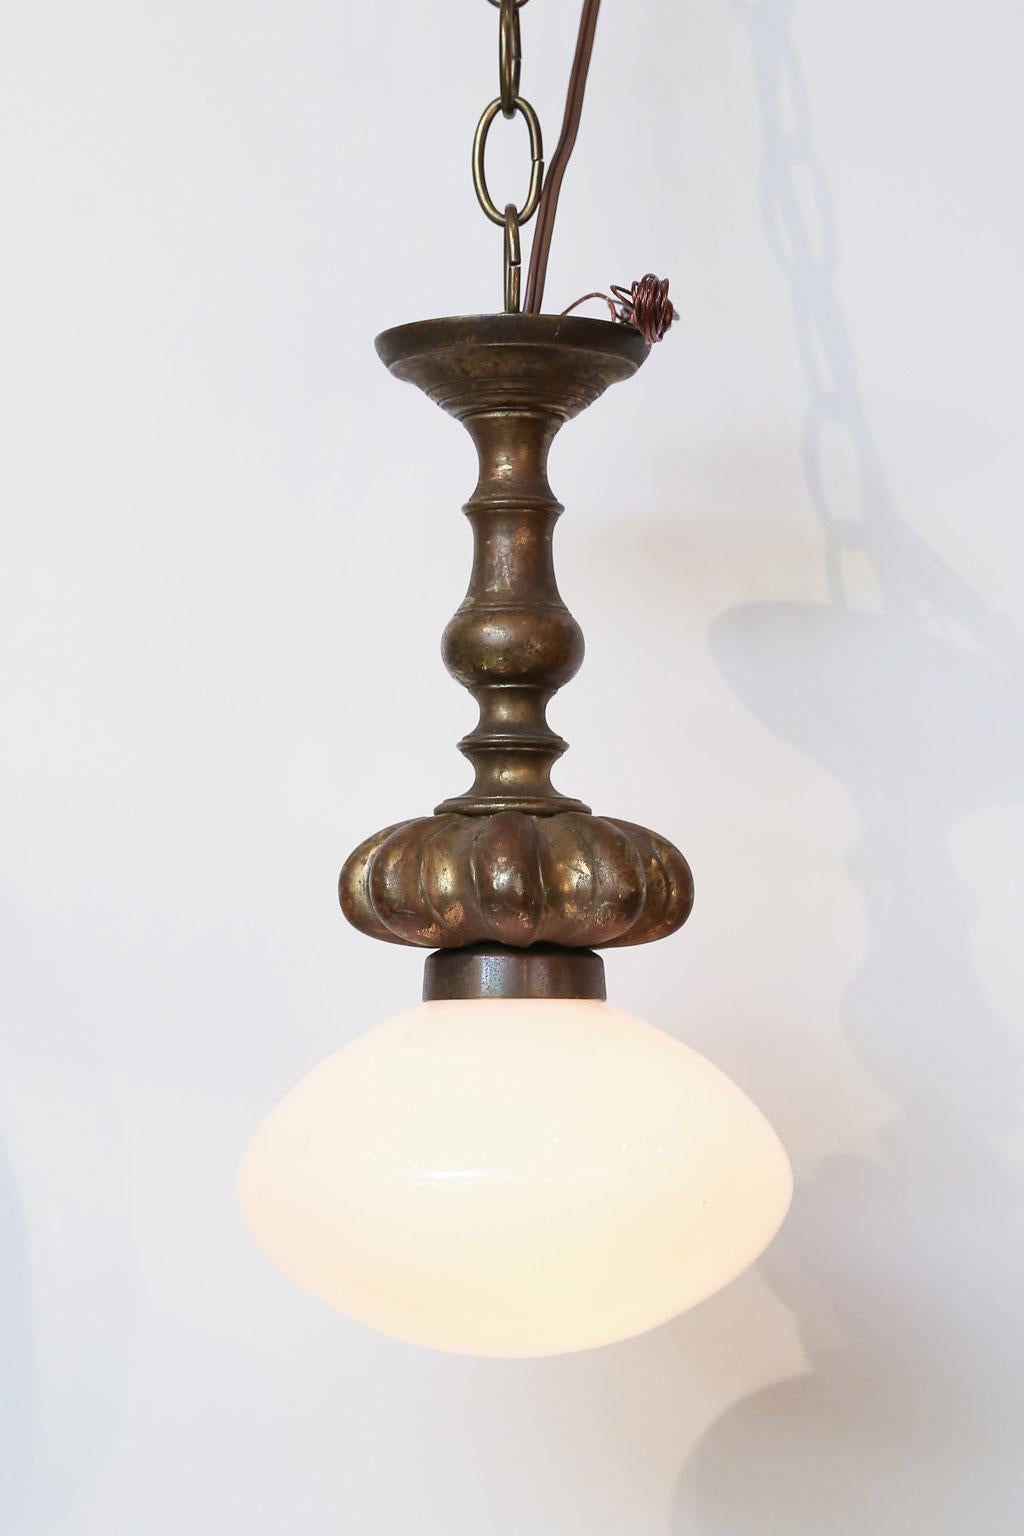 Cast French bronze fixture from the early 1900s with a single light covered by an antique ovoid hand blown milk glass globe. Newly wired for use within the USA. The bronze is beautiful and heavy. The light is simple and elegant and would make a